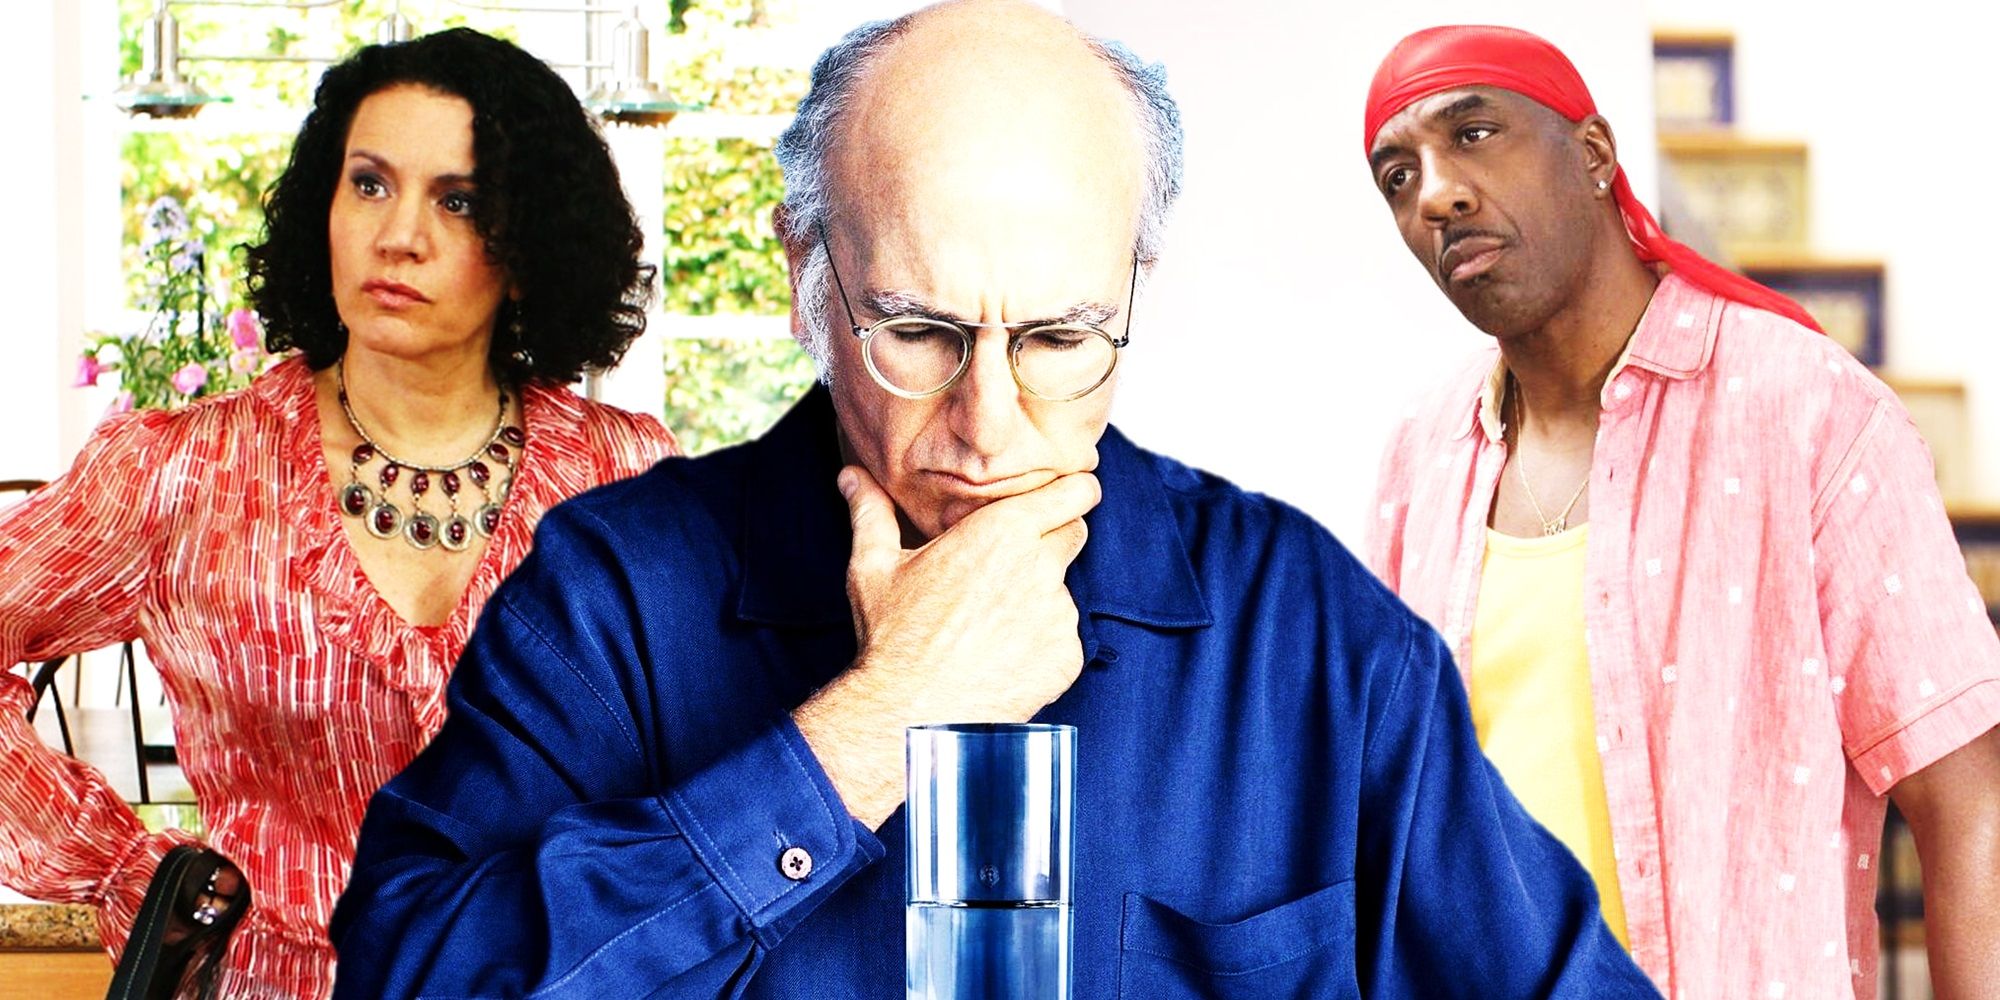 All Grown Up Susie - Larry David's 10 Best Scene Partners In Curb Your Enthusiasm, Ranked